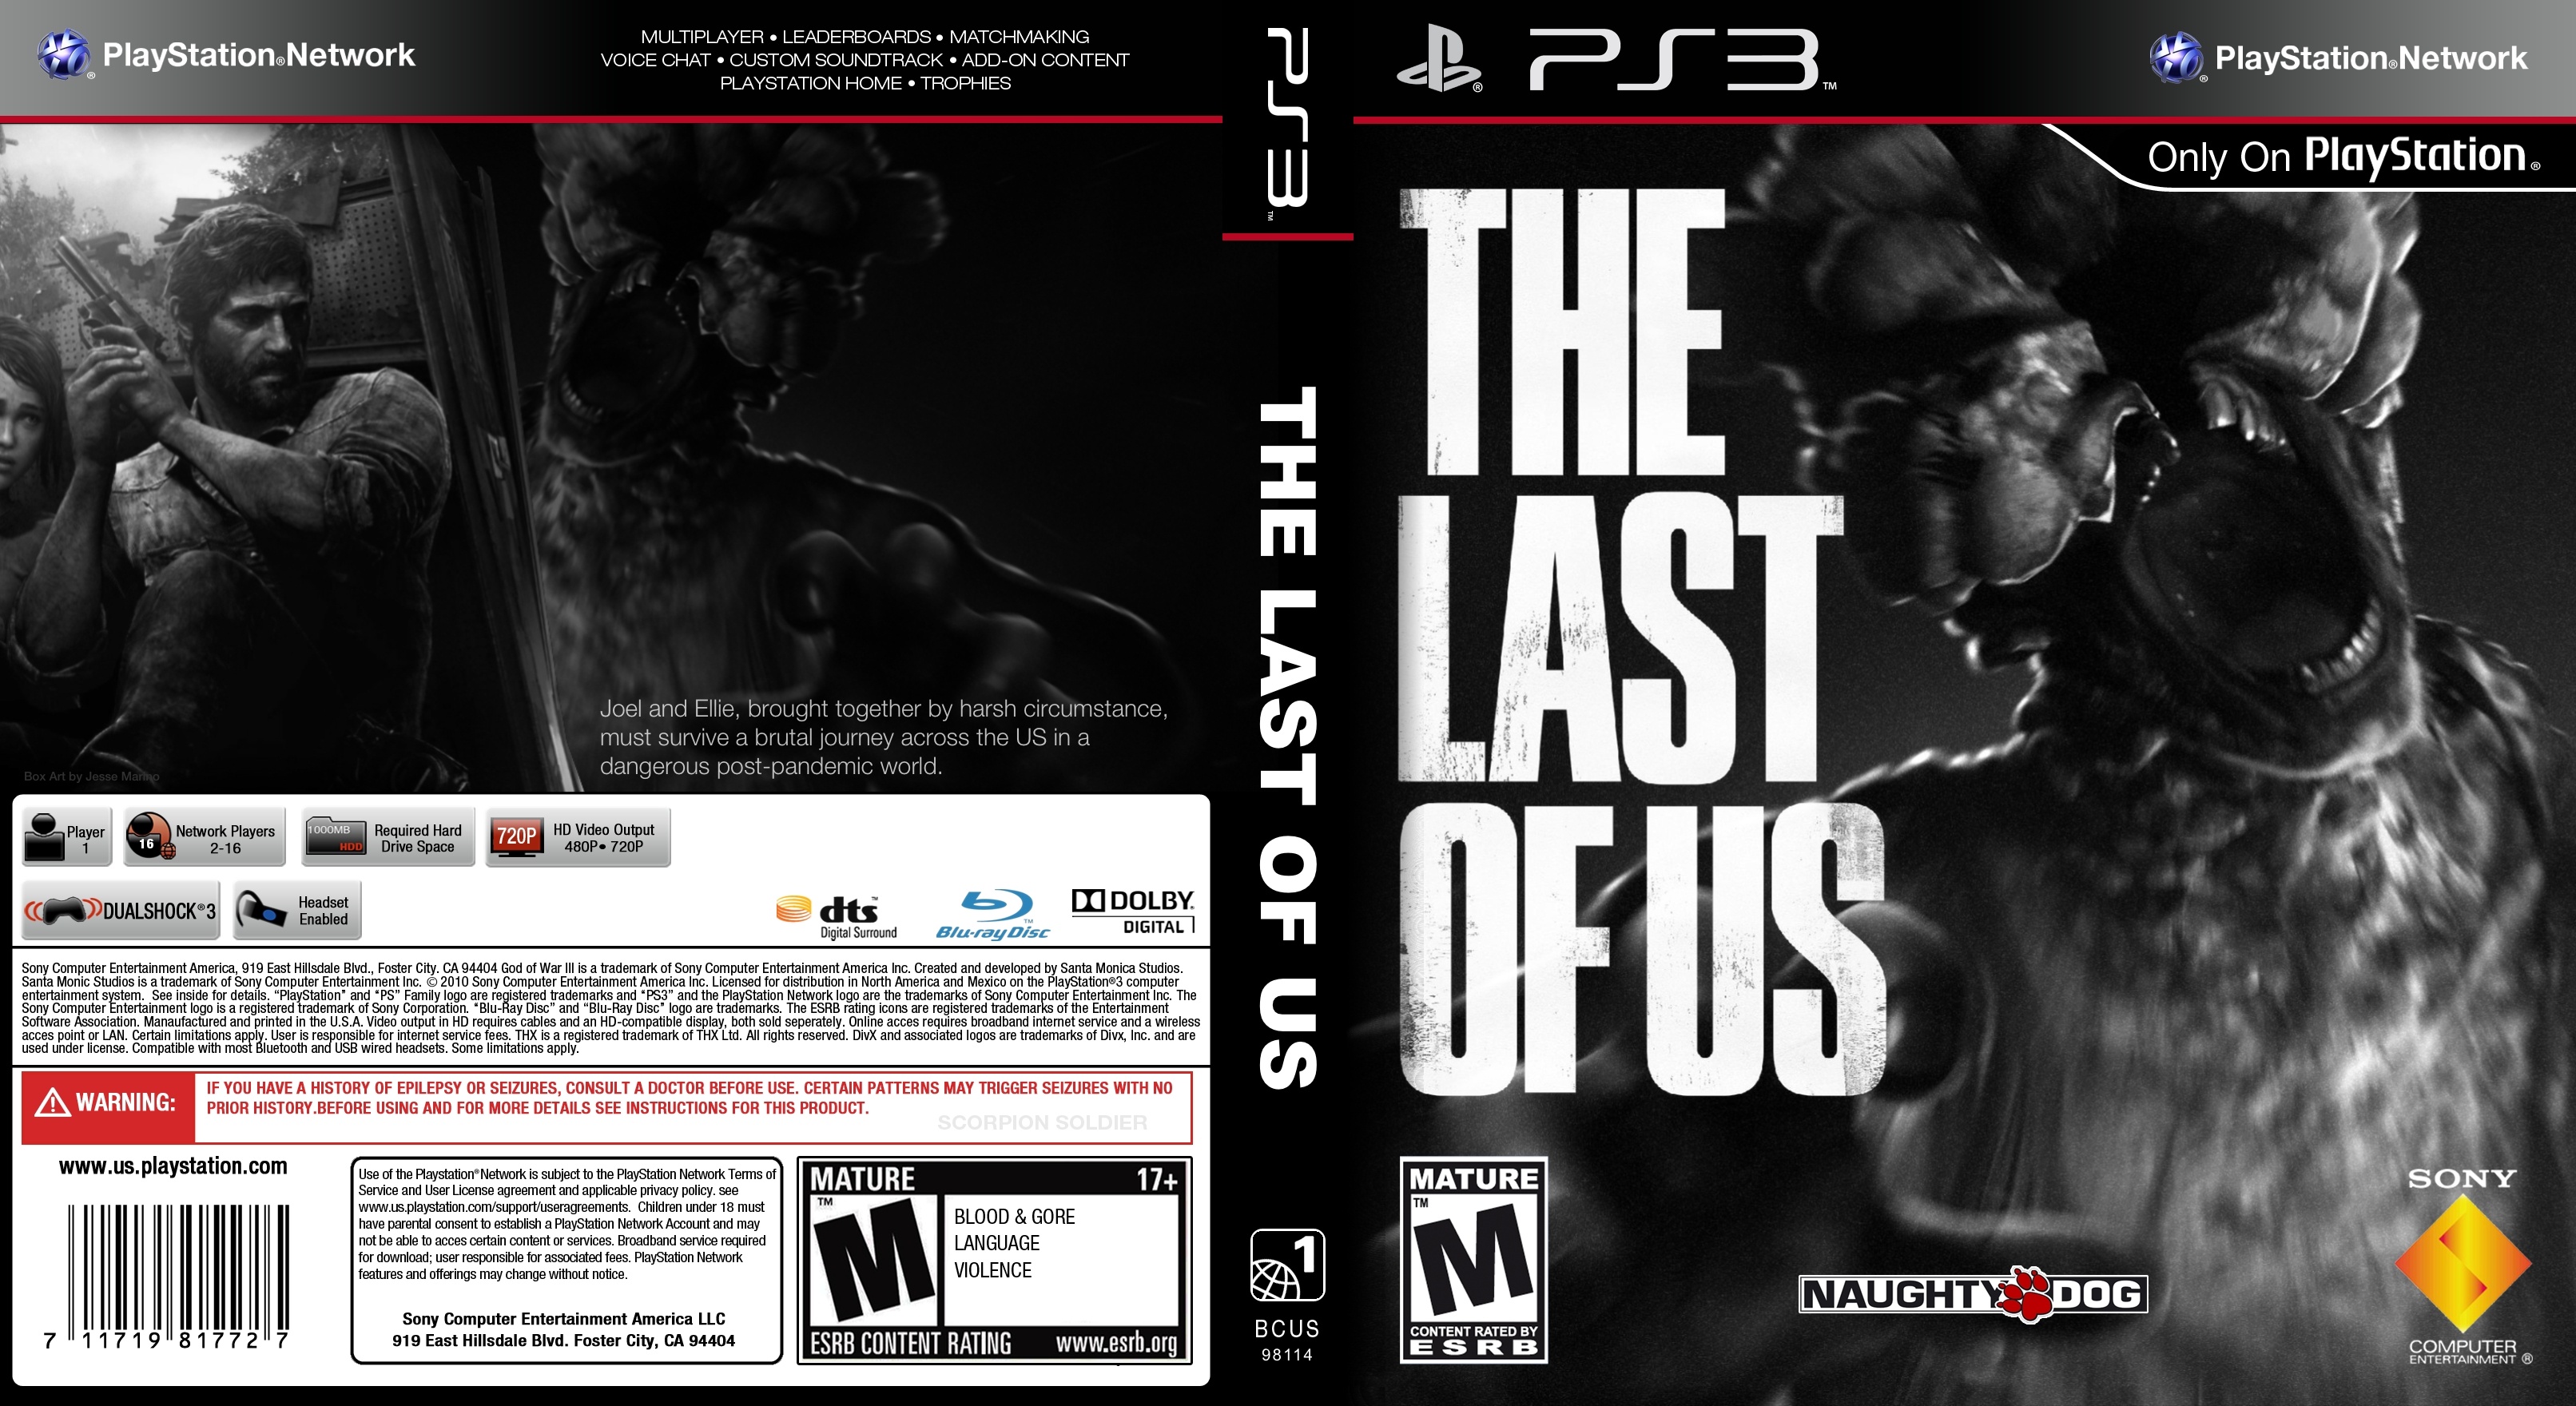 last of us part 1 released on xbox